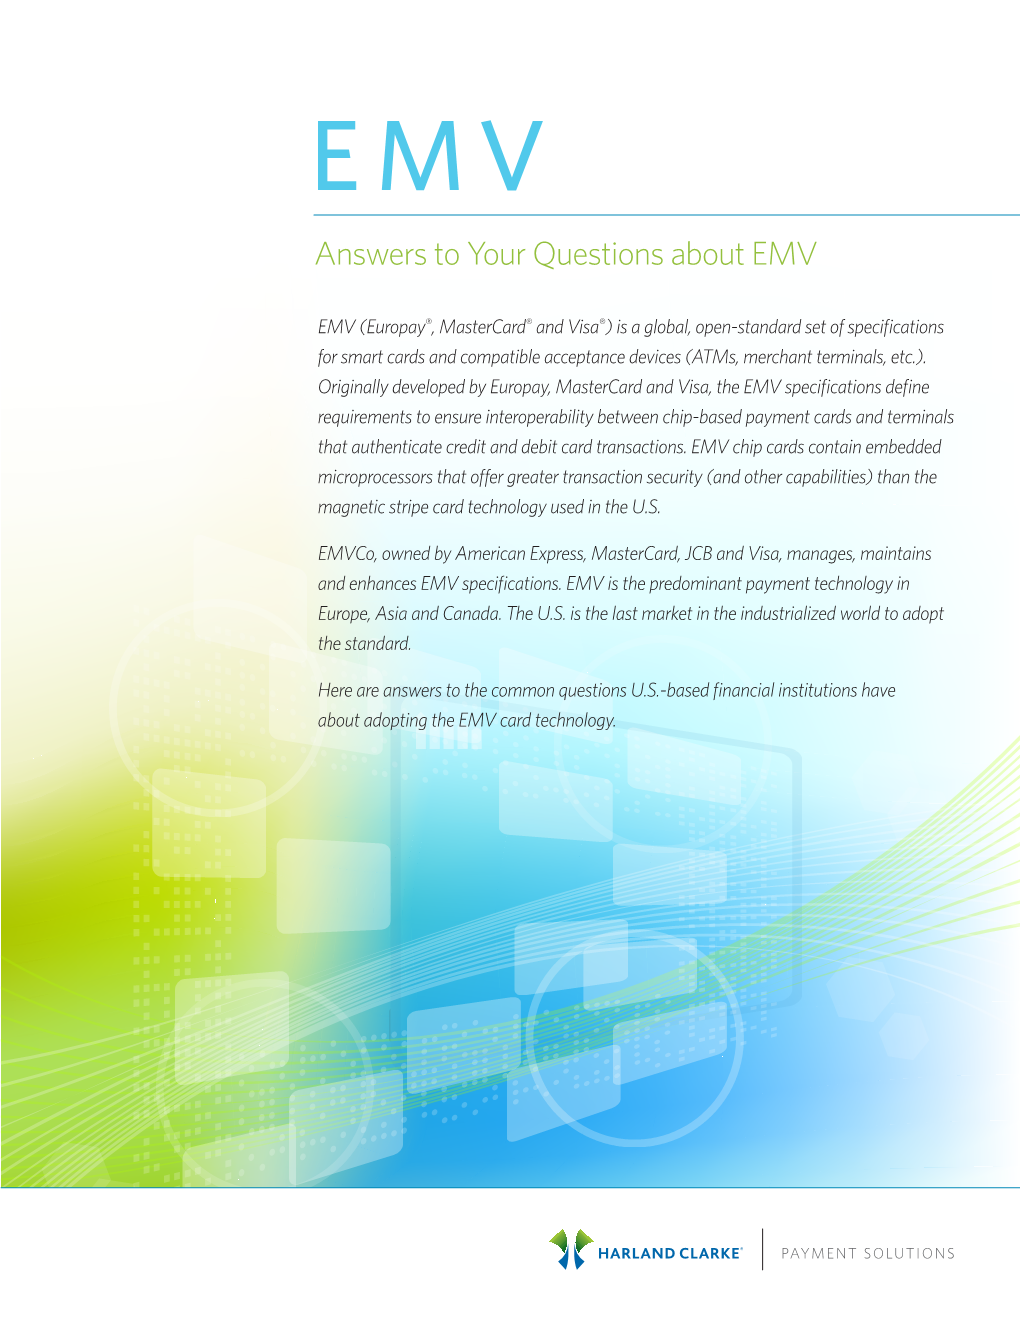 Answers to Your Questions About EMV